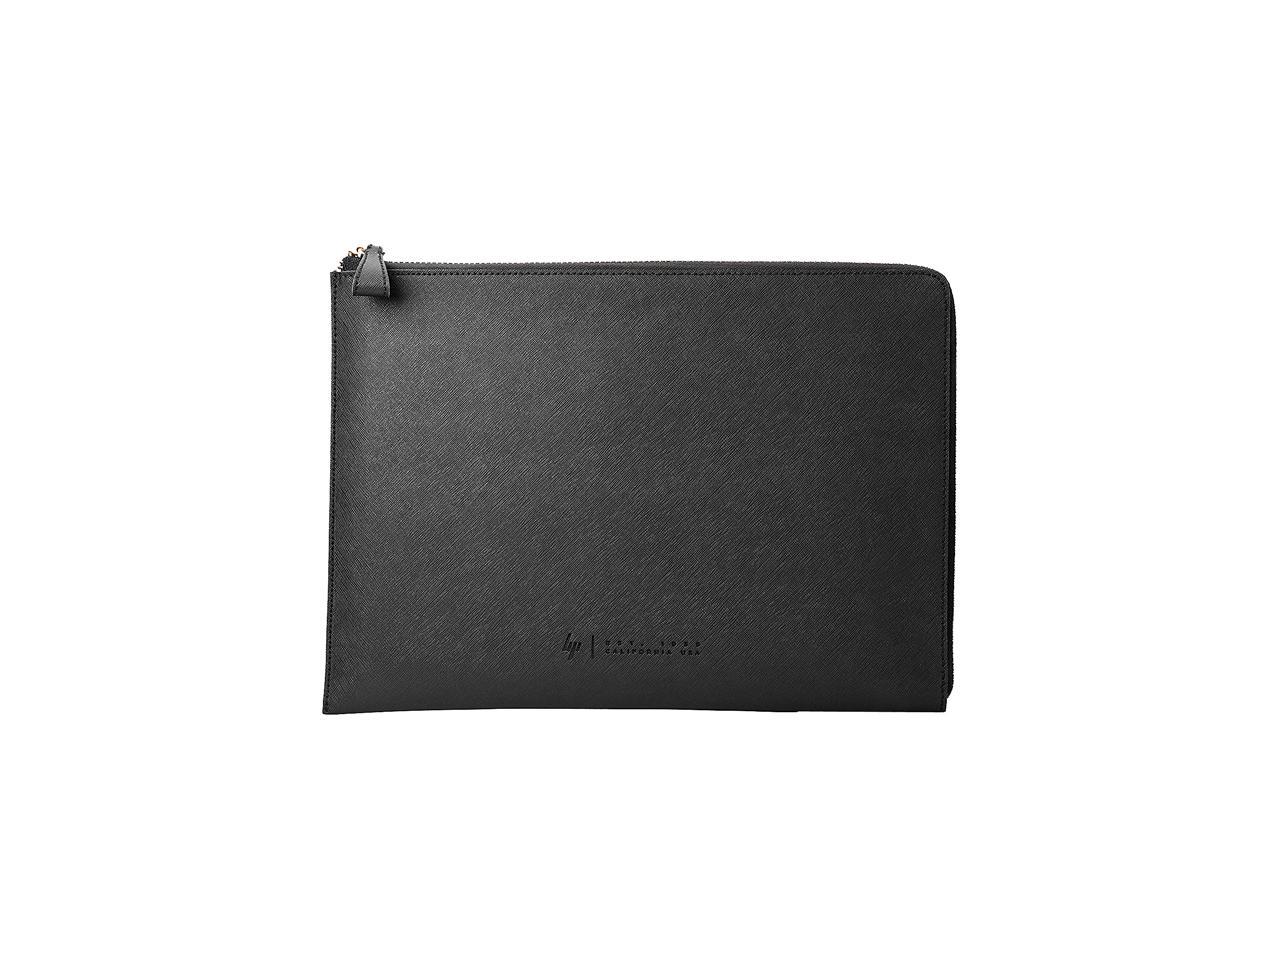 HP Spectre 13-inch Laptop Leather Sleeve (Dark Ash Silver with Copper ...